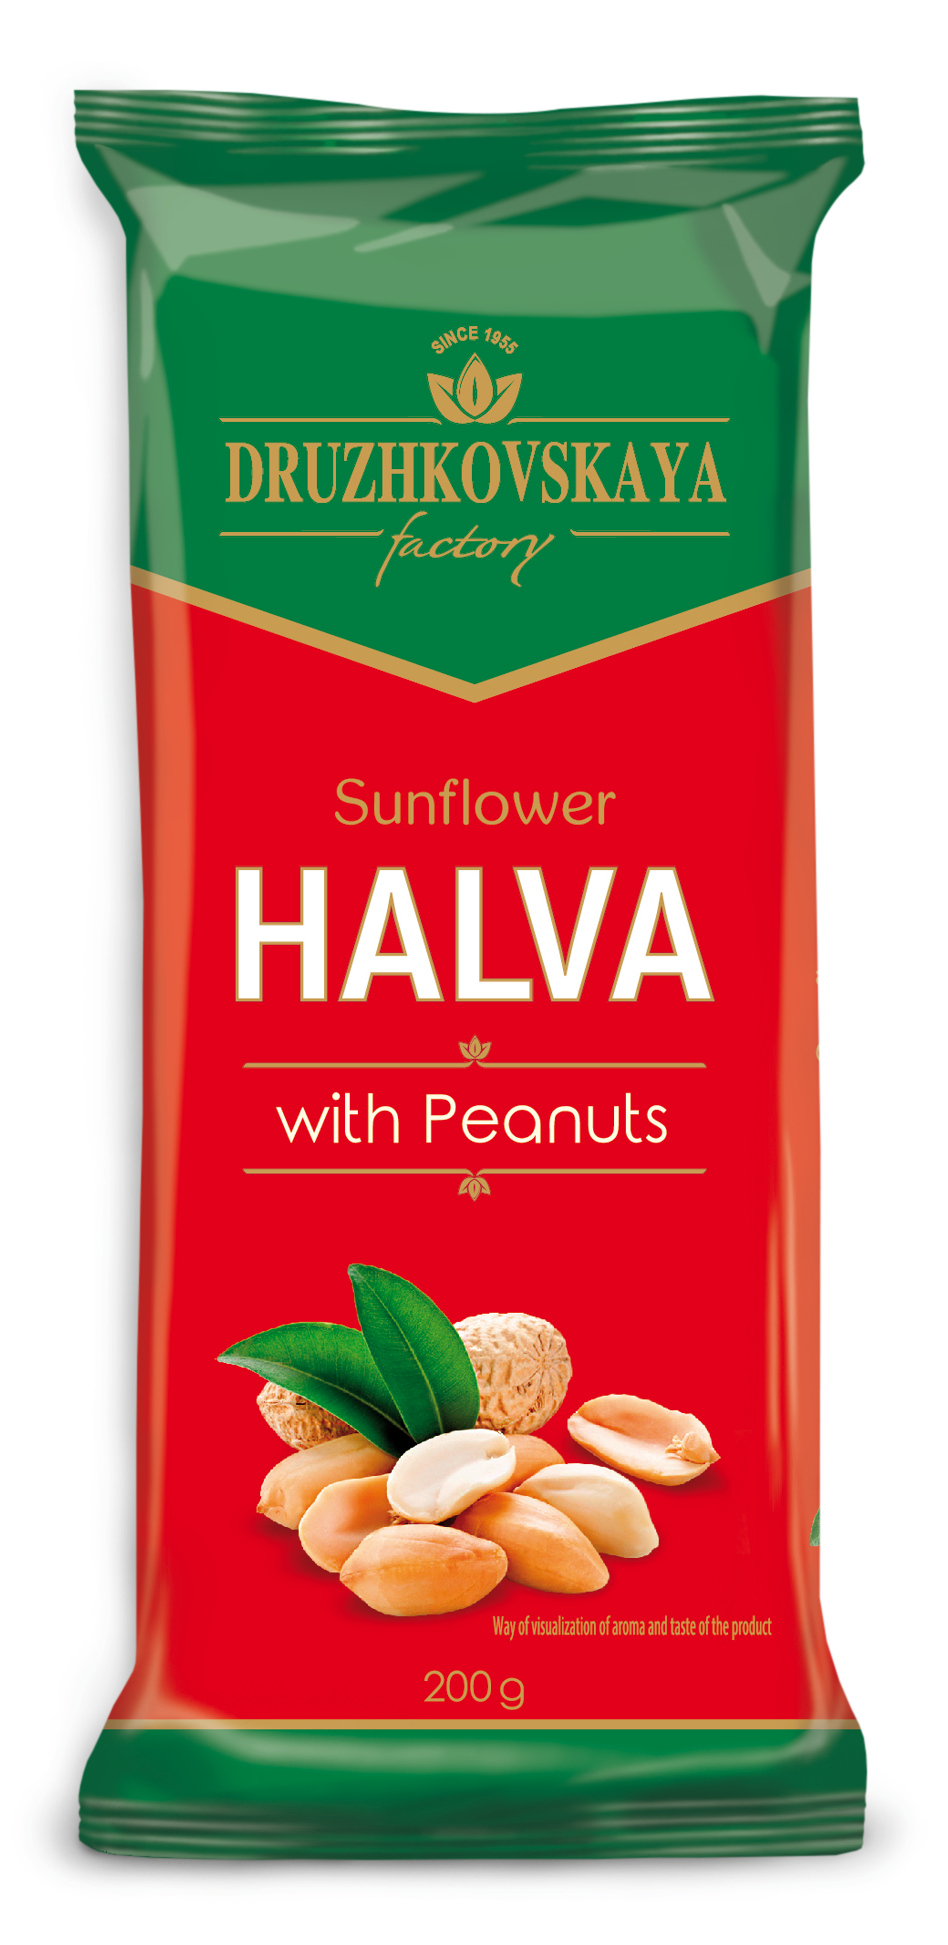 Sunflower Halva with Peanuts Packed in Flow-pack, 200 g